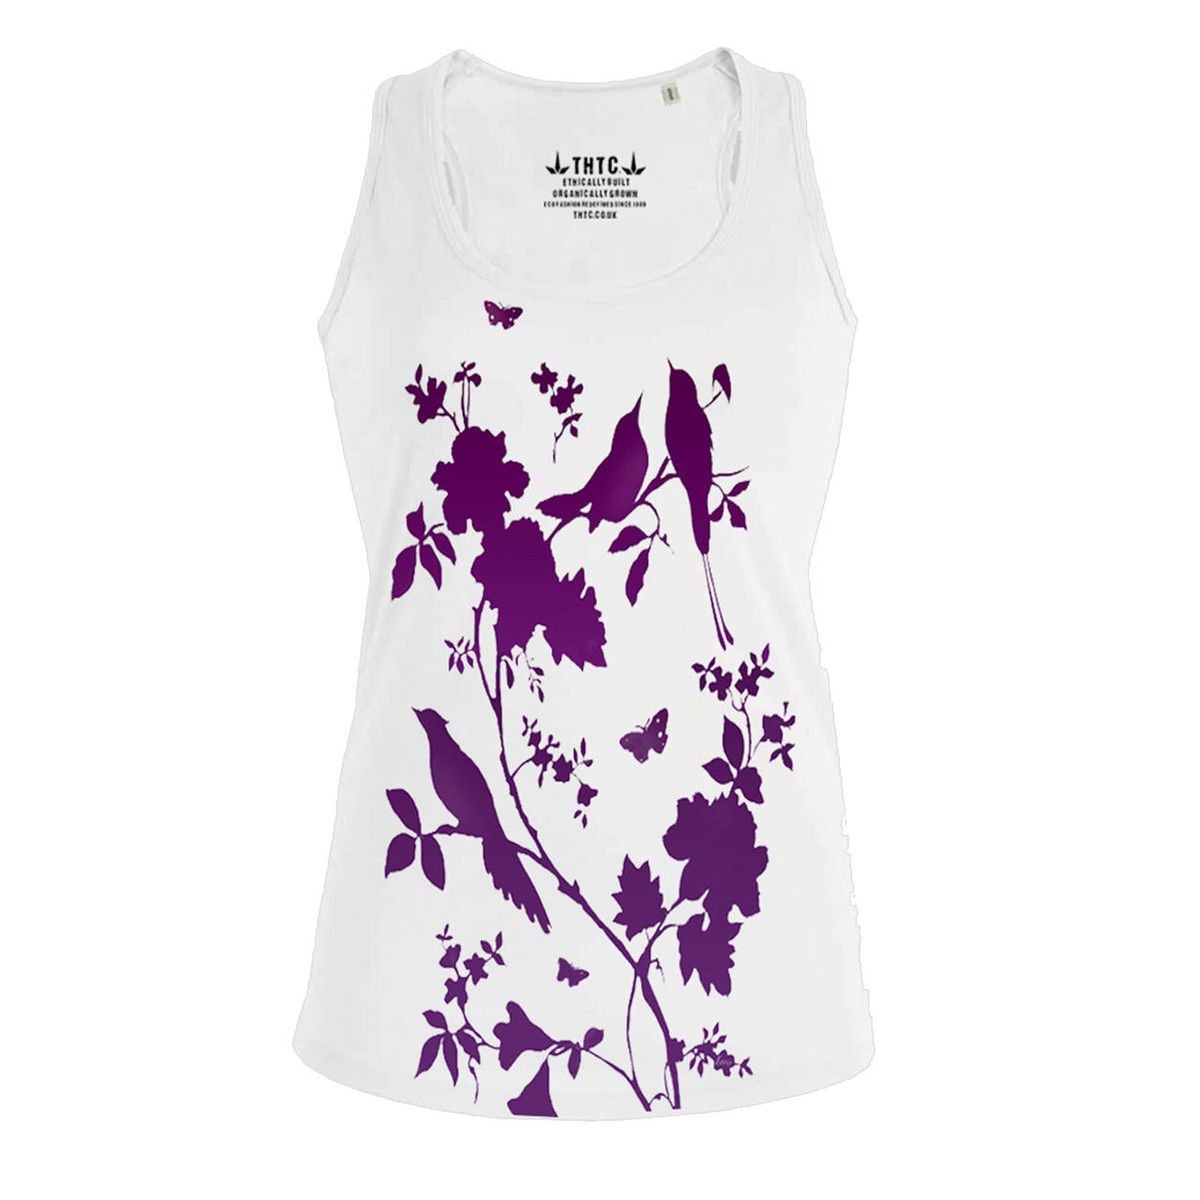 THTC Clothing Co BIRDIES Organic Cotton Vest By THTC Clothing